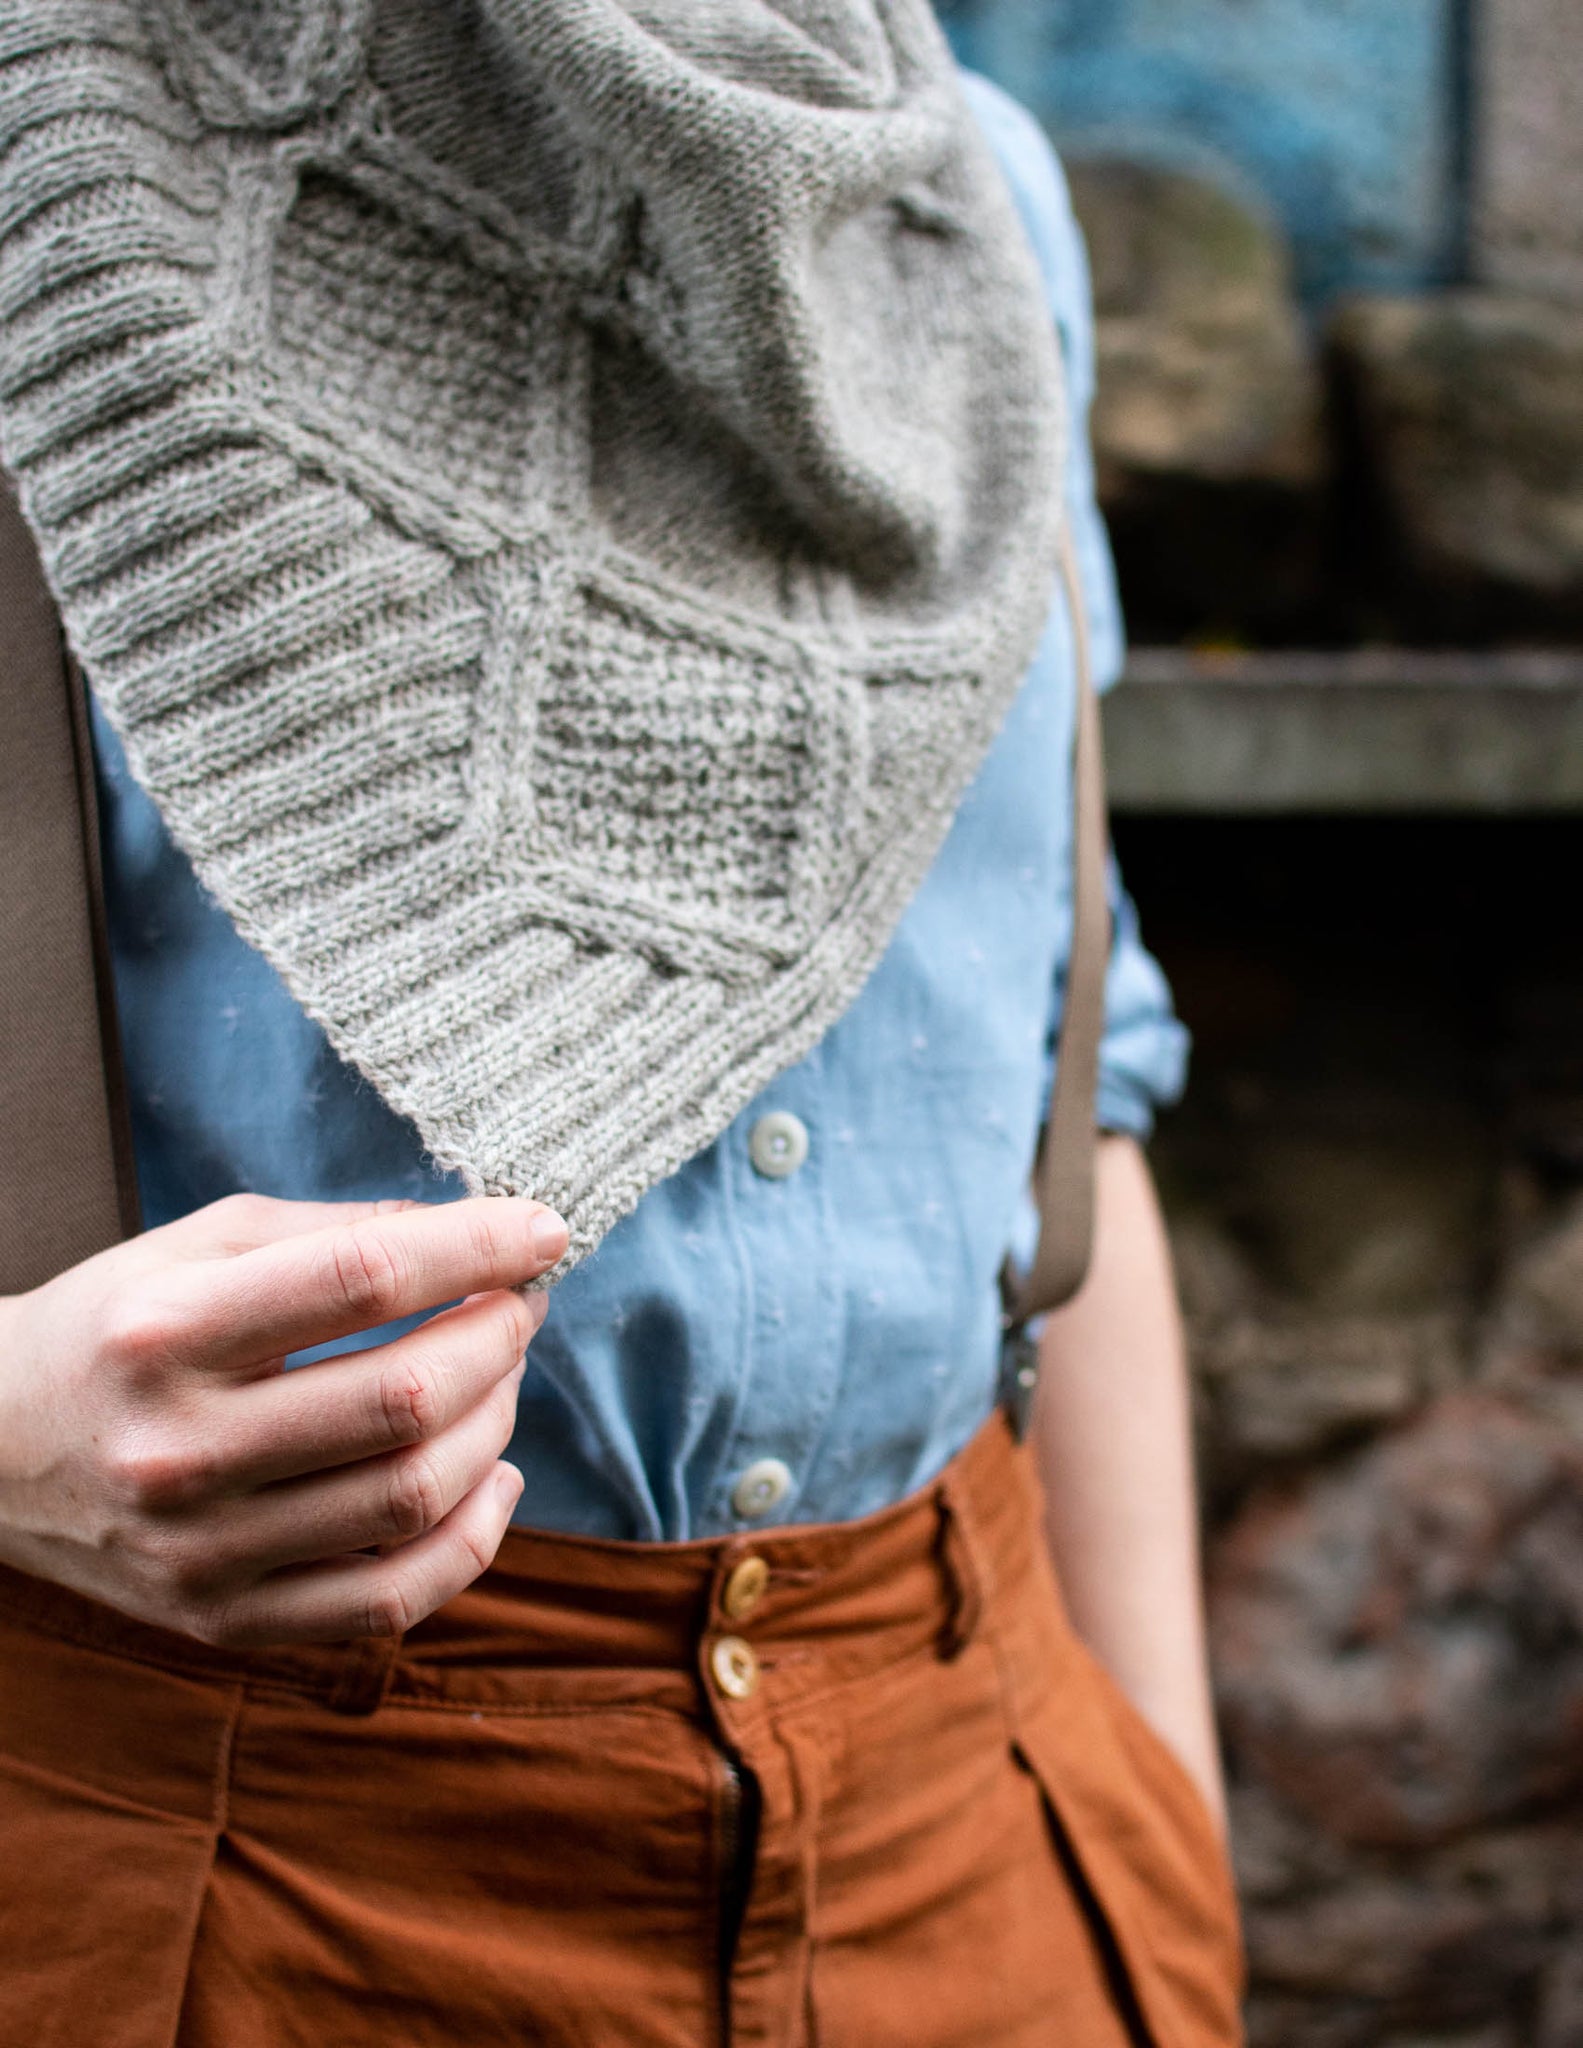 a close of of a cabled edge of a grey shawl, the corner of which is held out by a white hand. The model wears a blue shirt with braces and brown trousers.